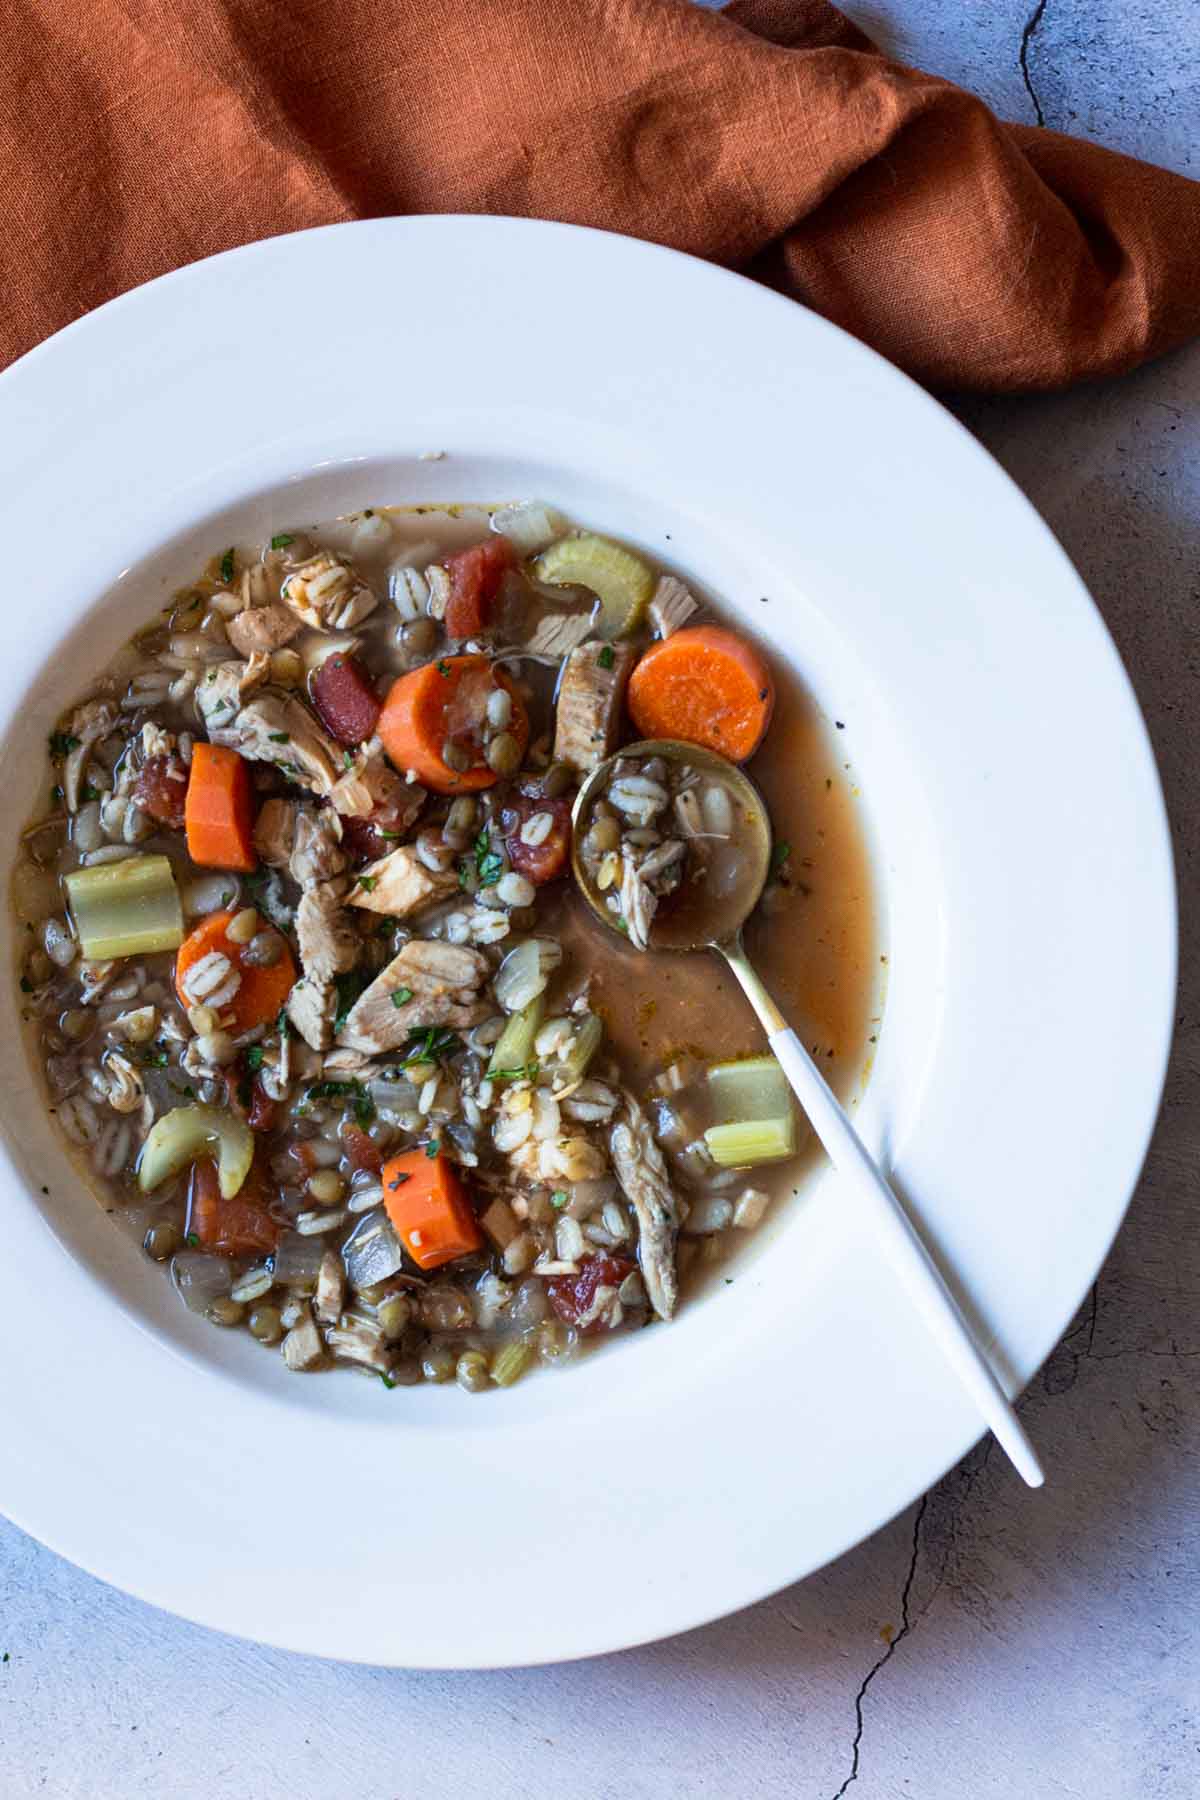 Lentil soup with turkey, barley and vegetables in a large white bowl.